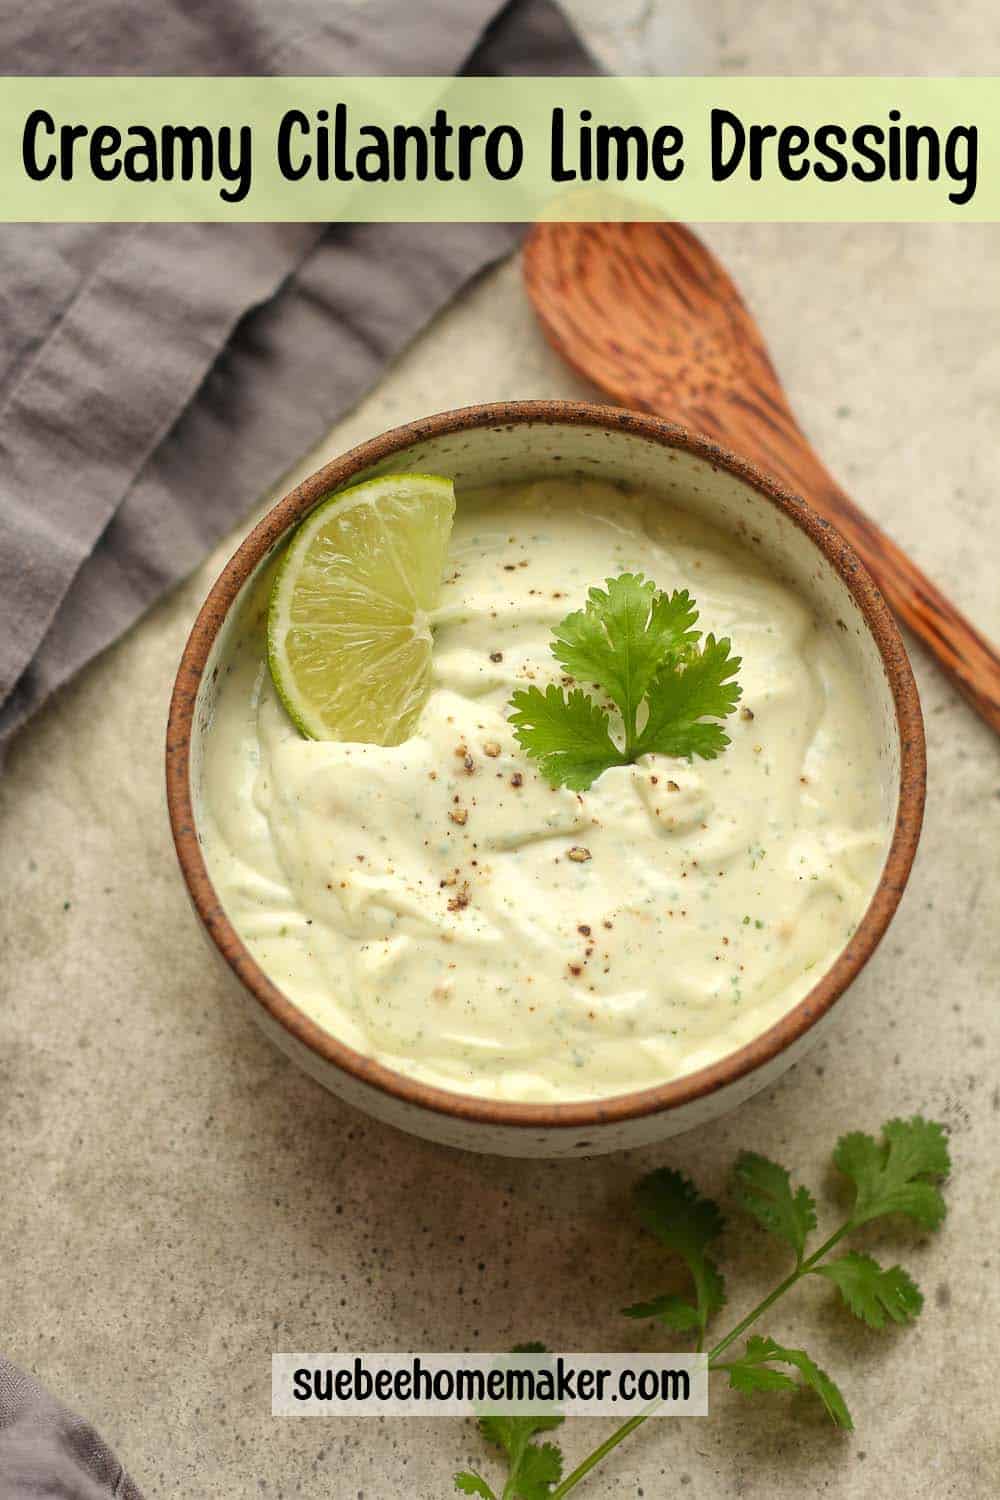 A bowl of creamy cilantro lime dressing with a wedge of lime.